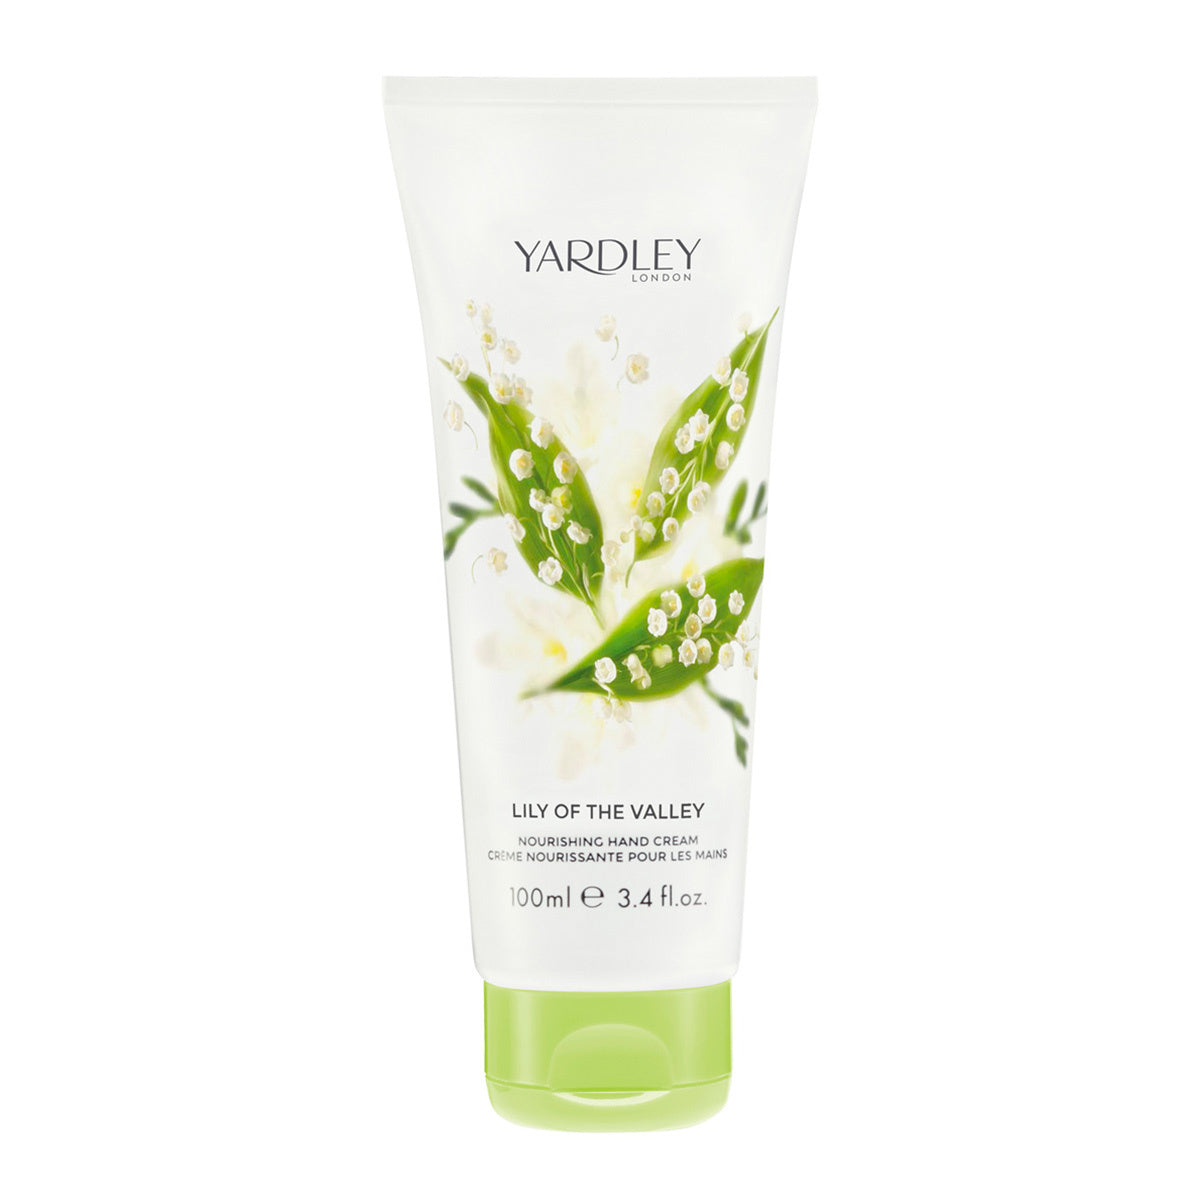 Primary image of Lily of the Valley Nourishing Hand Cream